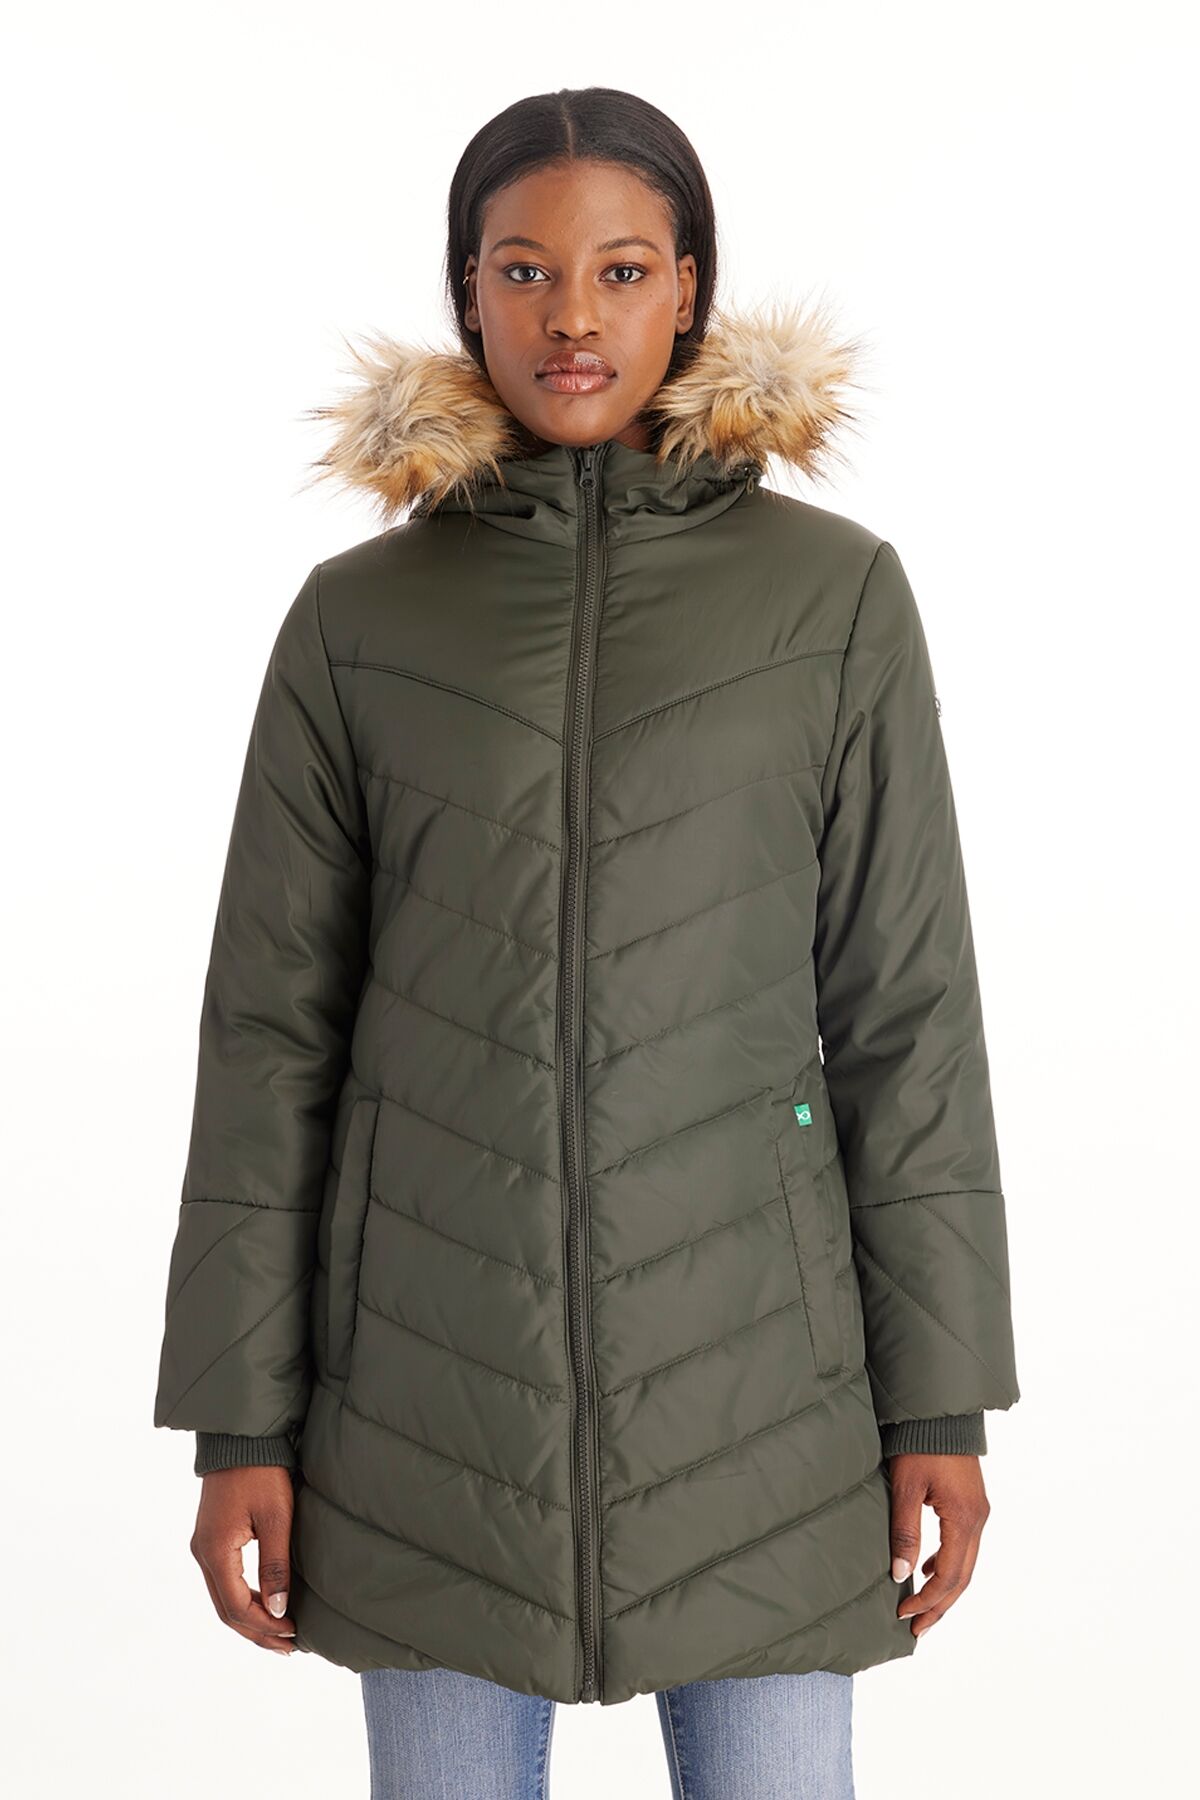 Modern Eternity Maternity Maternity Lexi - 3in1 Coat With Removable Hood - Khaki green